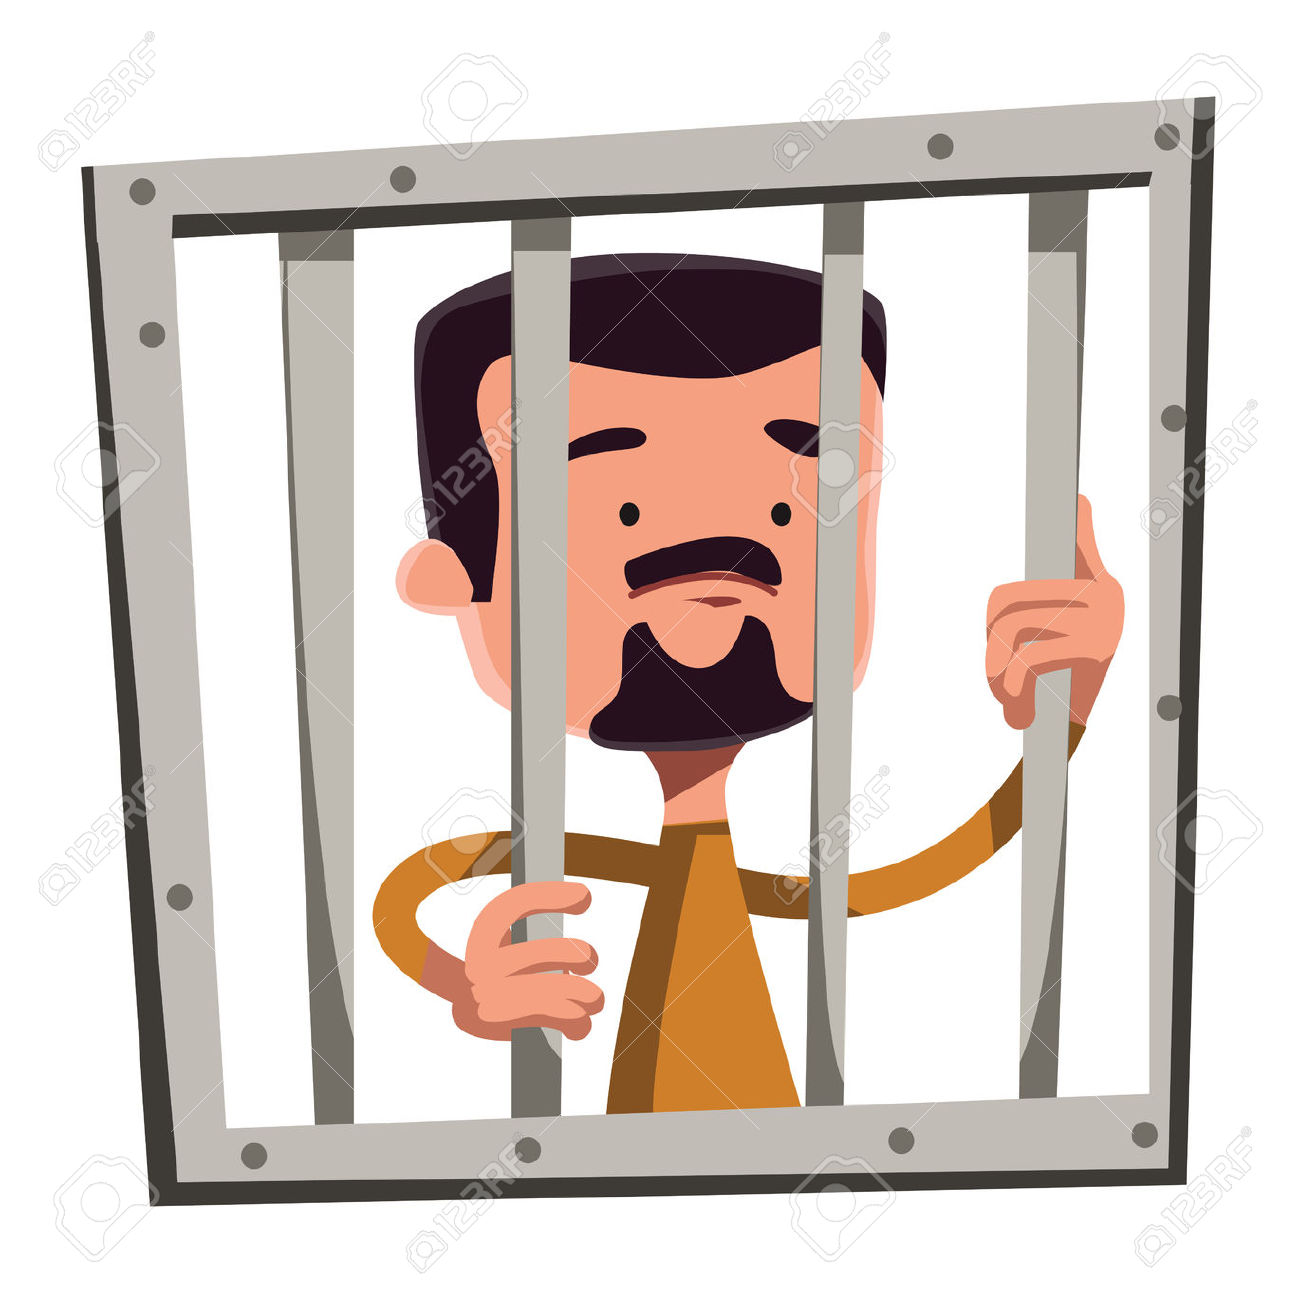 Jail Cartoon Clipart | Free download on ClipArtMag